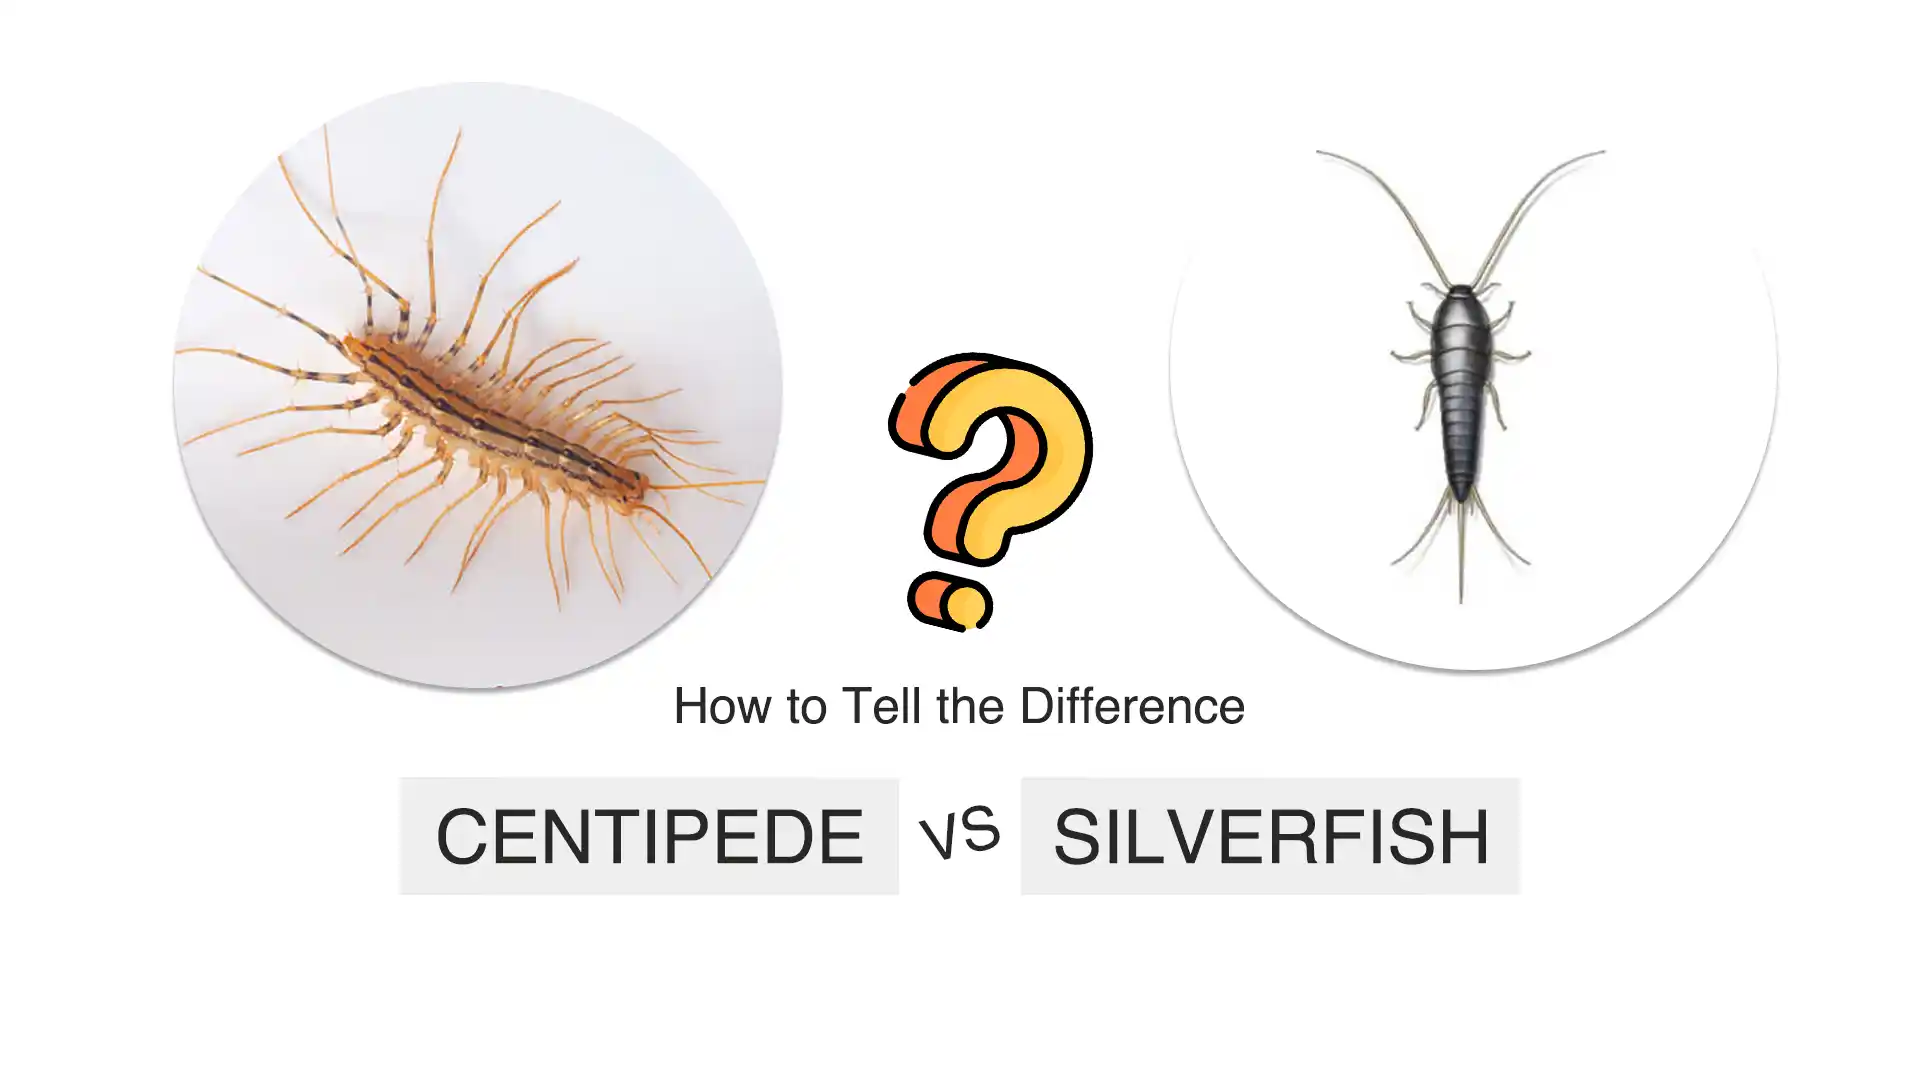 House Centipede Silverfish: How to Tell the Difference